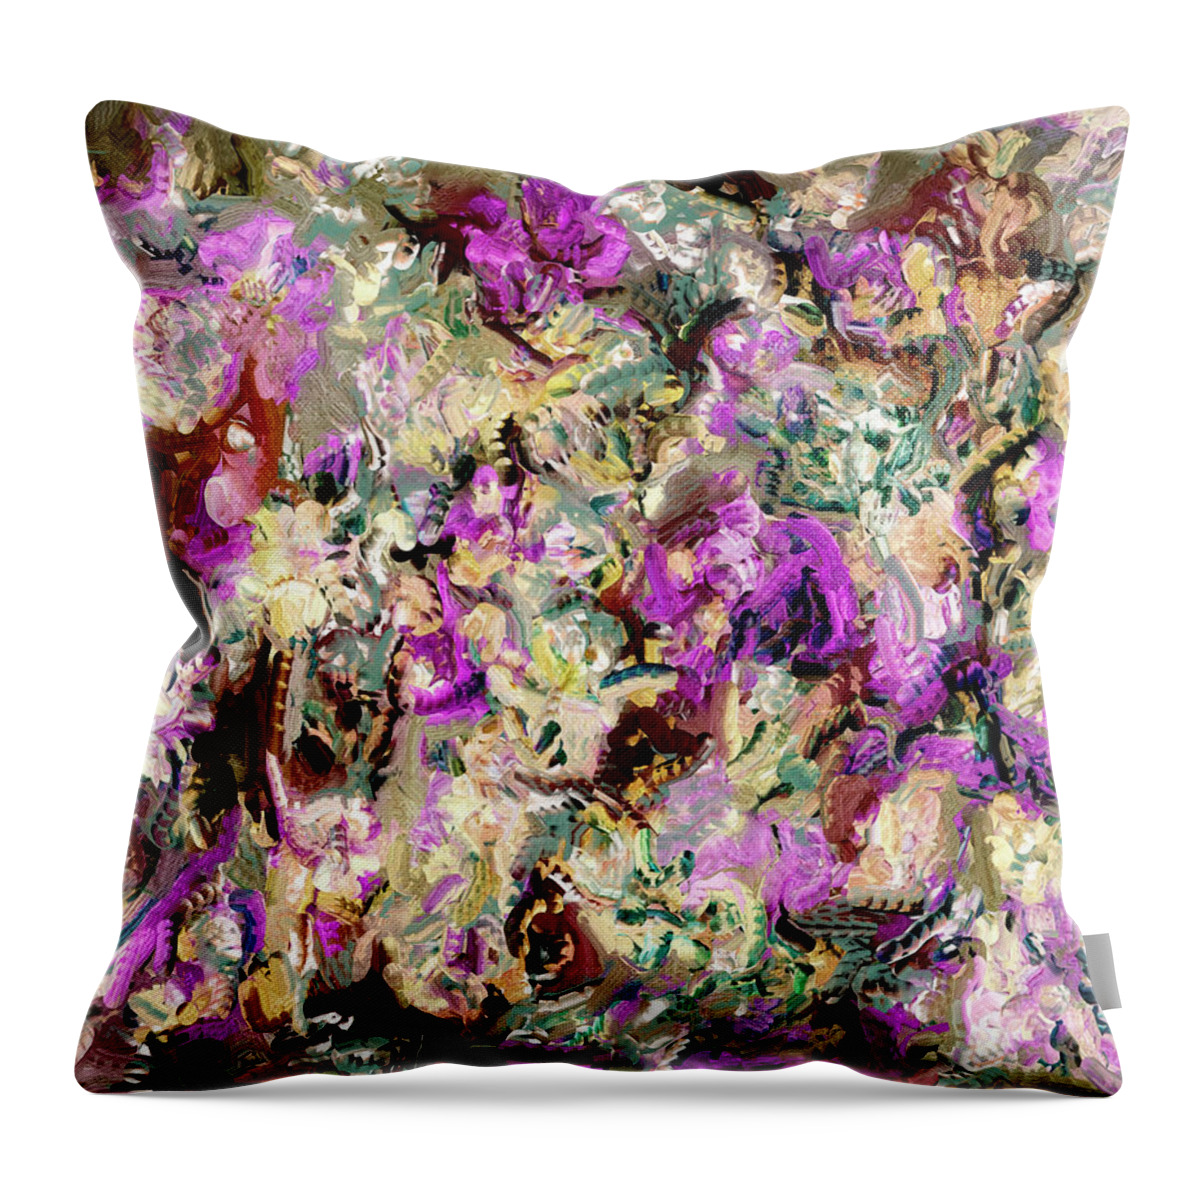 Cyber Painting Throw Pillow featuring the painting Cyber Painting by Don Wright